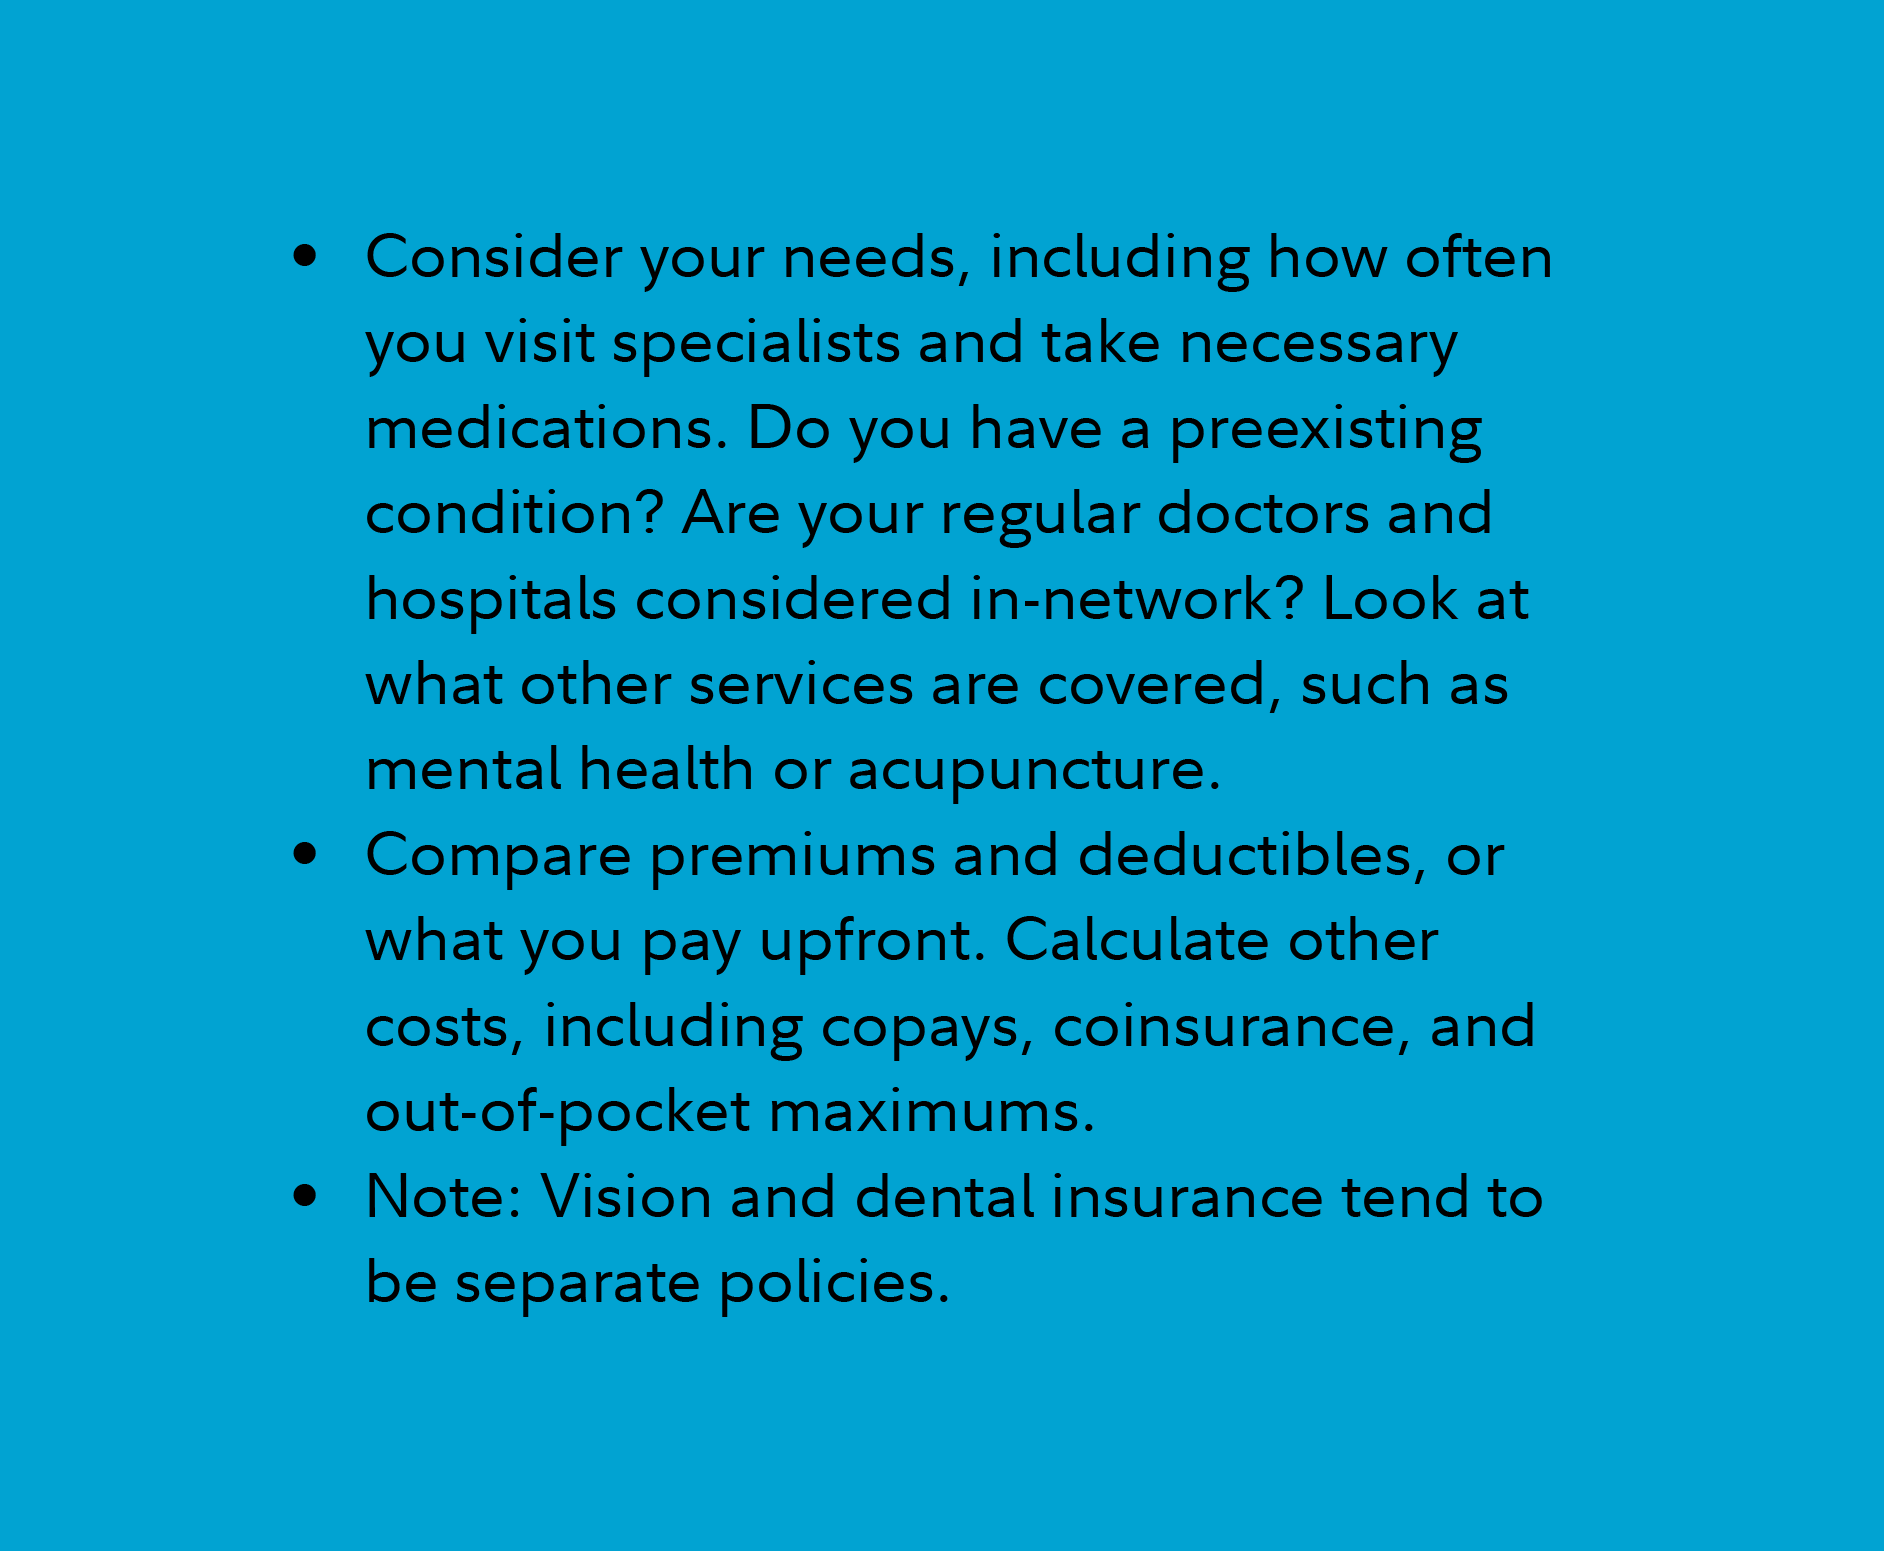 Consider your needs, including how often you visit specialists and take necessary medications. Do you have a pre-existing condition? Are your regular doctors and hospitals considered in-network? Look at what other services are covered, such as mental health or acupuncture.  Compare premiums and deductibles, or what you pay upfront. Calculate other costs, including co-pays, co-insurance, and out-of-pocket maximums.  Note: Vision and dental insurance tend to be separate policies.